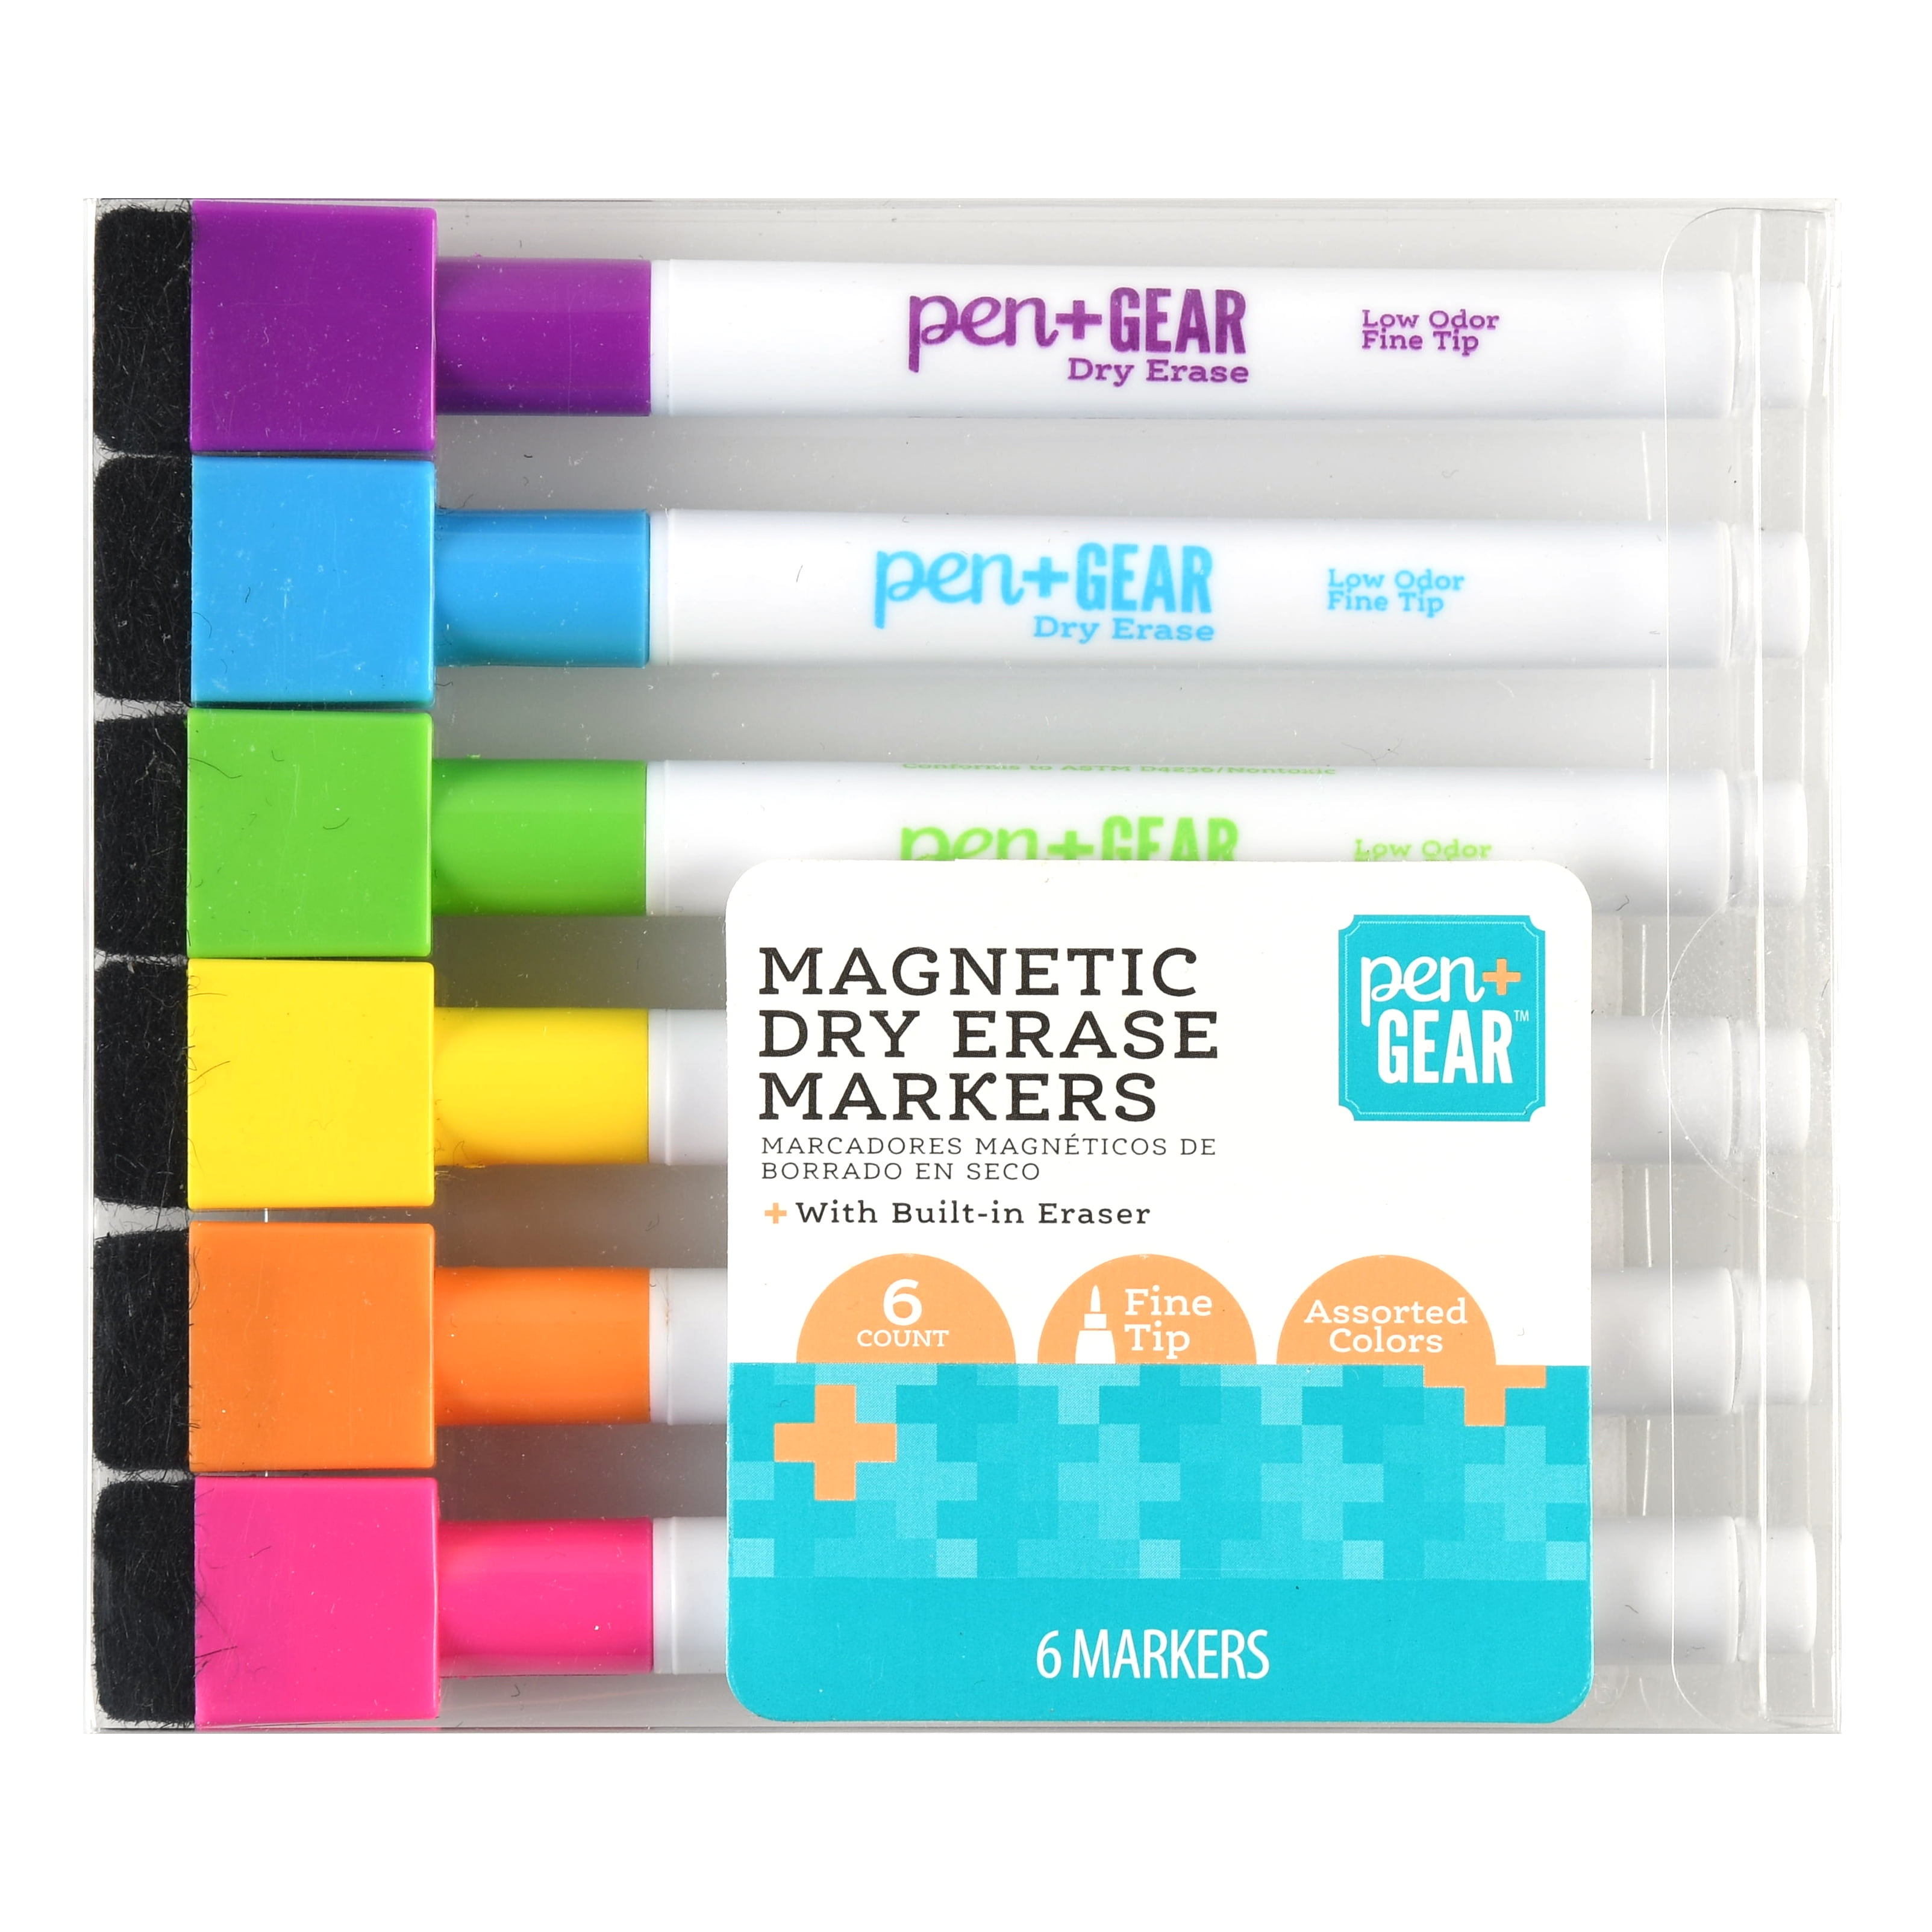 [30 Markers - 6 Colors] Think2 Magnetic Mini Dry Erase Markers with Eraser.  (5 Black, 5 Red, 5 Blue, 5 Green, 5 Purple, 5 Brown) Bulk Set. AP